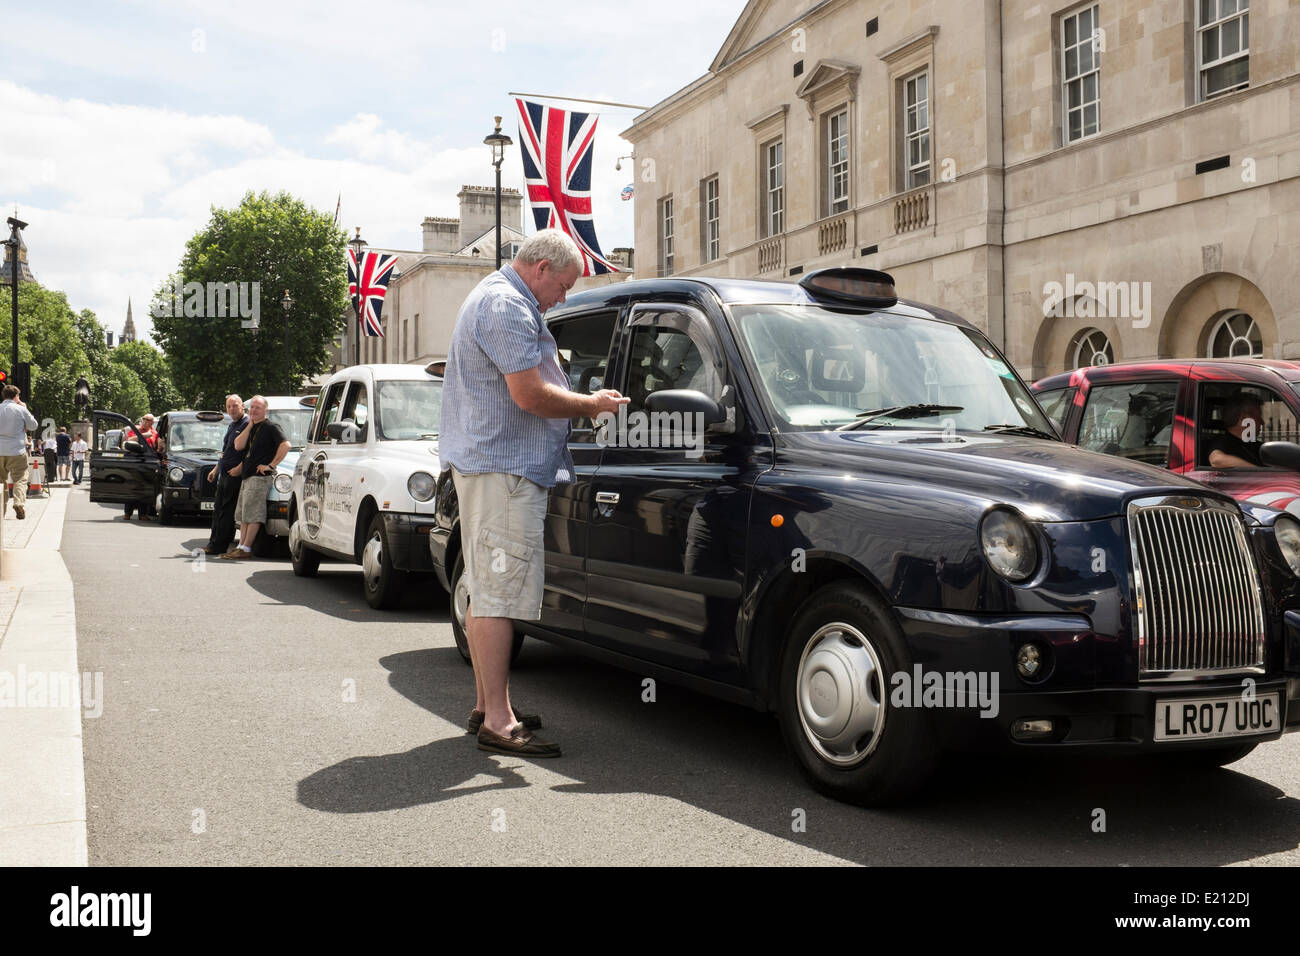 Whitehall during the London Taxi strike over the Uber mobile App. Thousands of London's Black Cabs  brought parts of central London to a standstill. Whitehall, Central London, 11th June 2014 Stock Photo